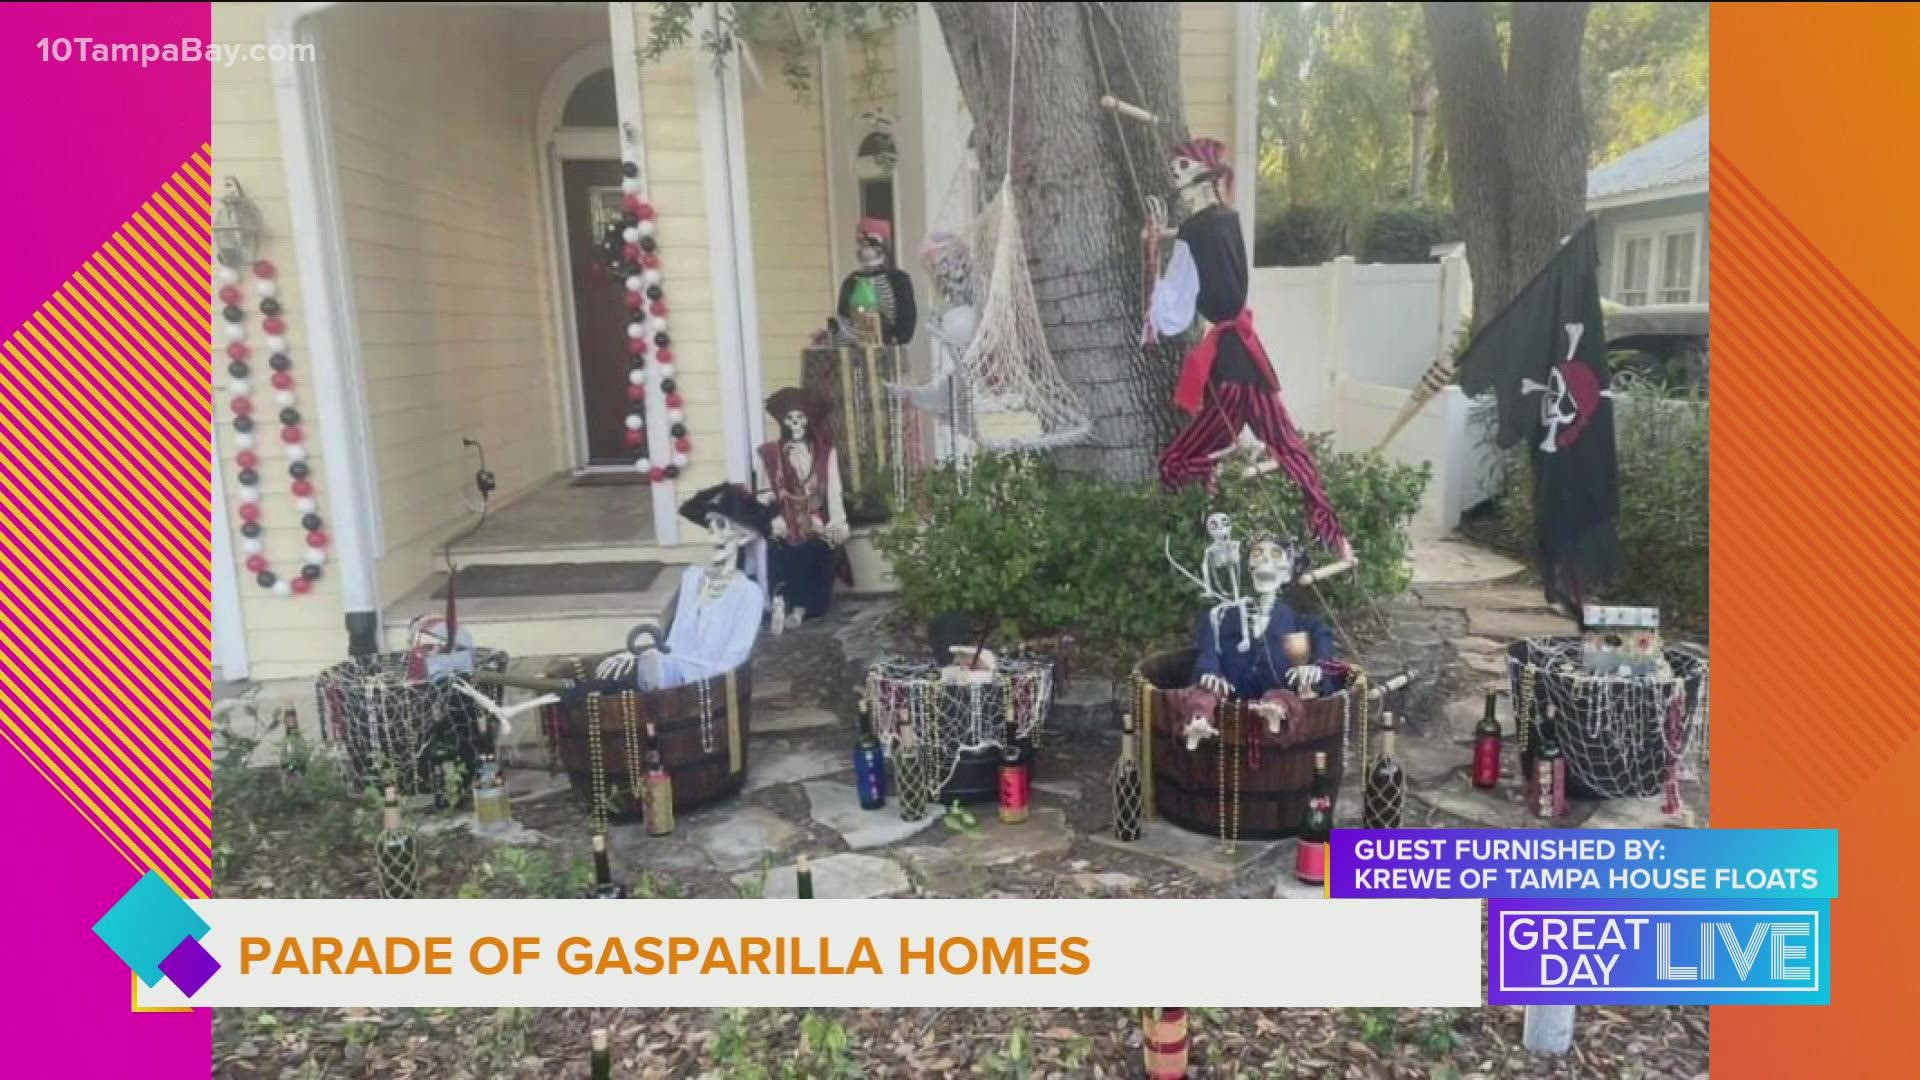 Don’t like the crowds at Gasparilla? Get in the pirate spirit with a walking tour of decorated house floats.